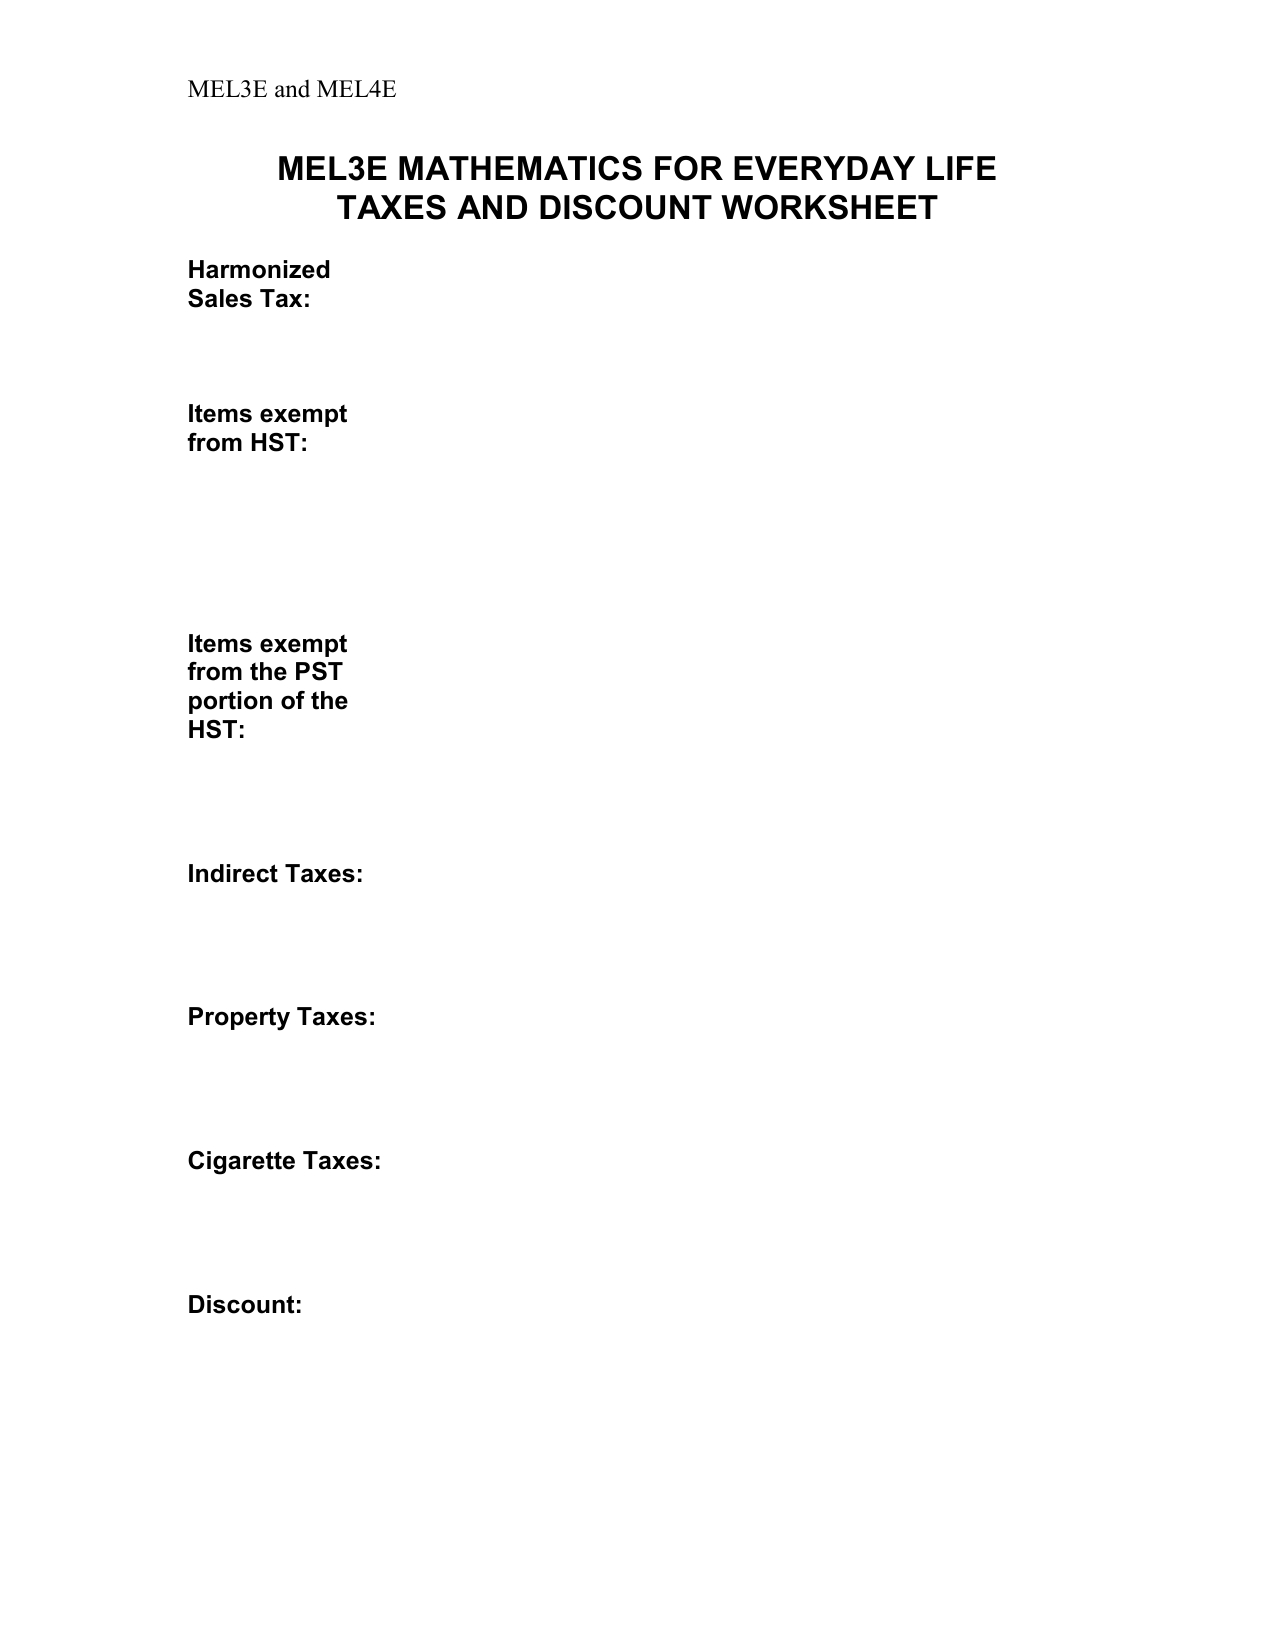 Discounts And Sales Tax Worksheet